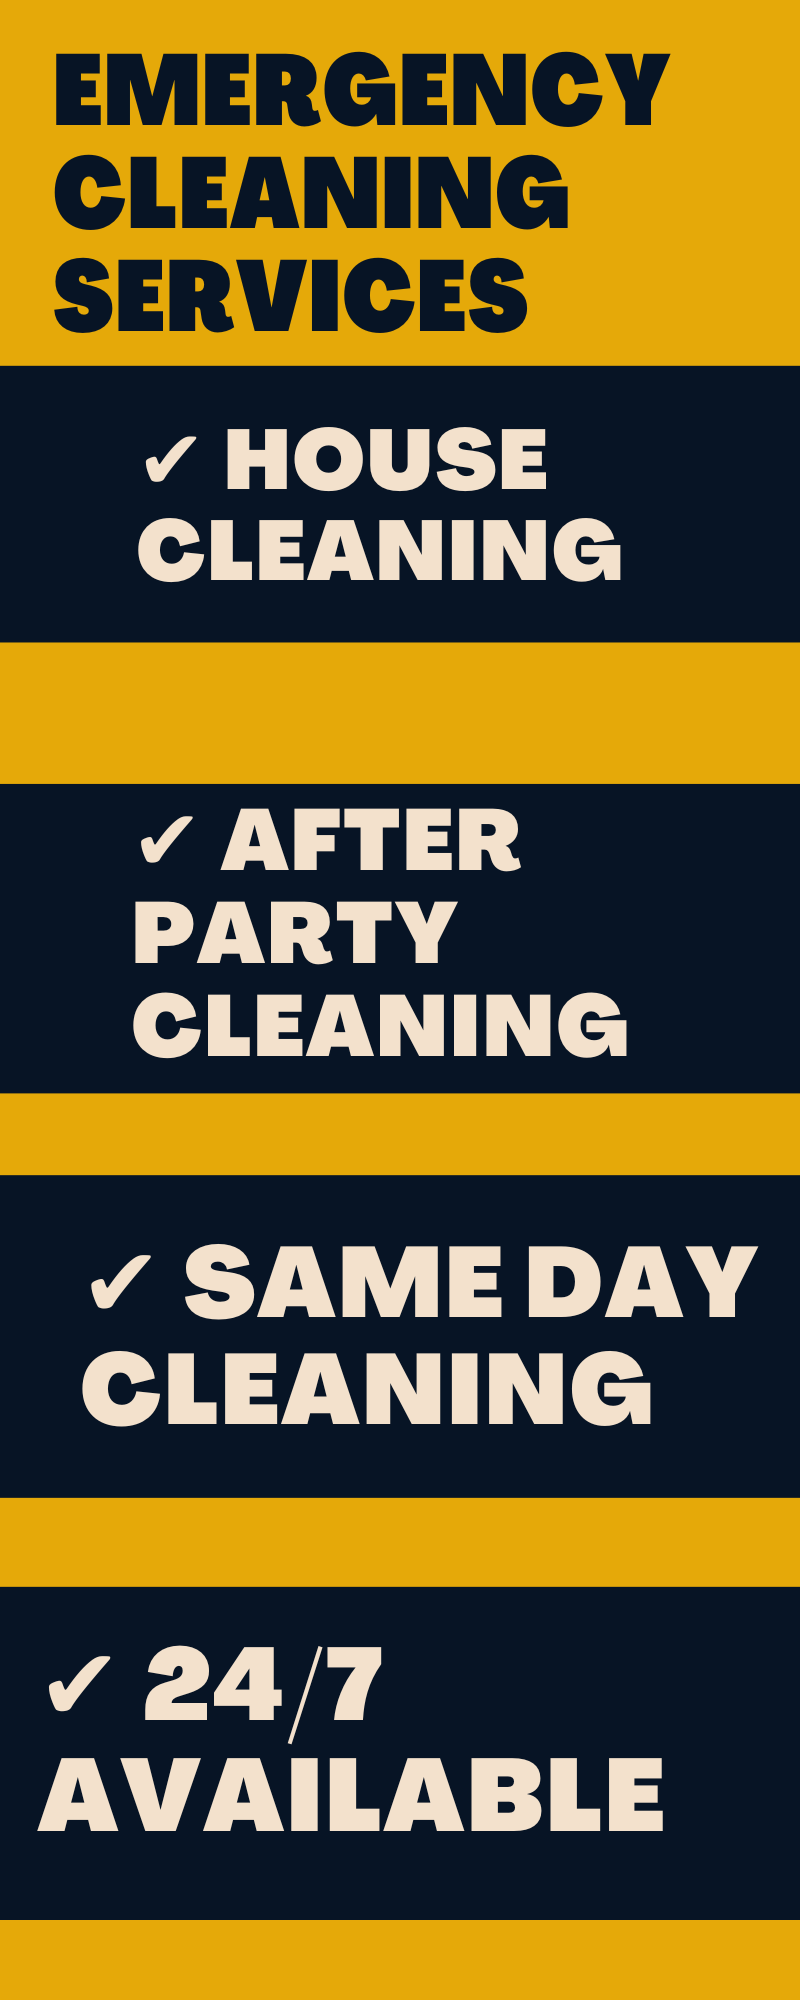 Emergency cleaning services | Cleanup